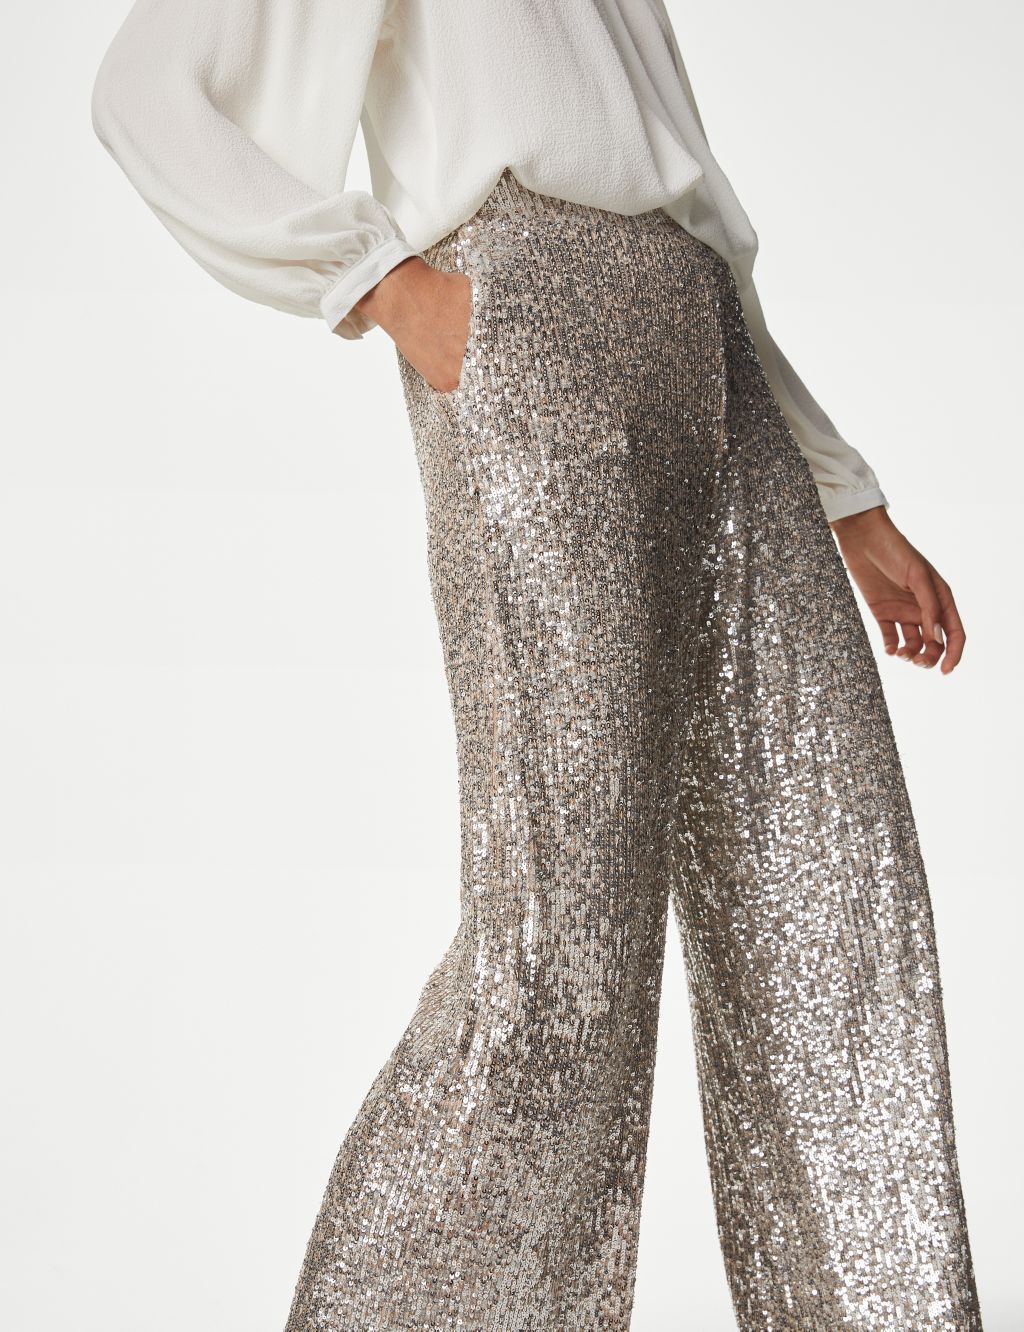 Sequin Elasticated Waist Wide Leg Trousers image 1